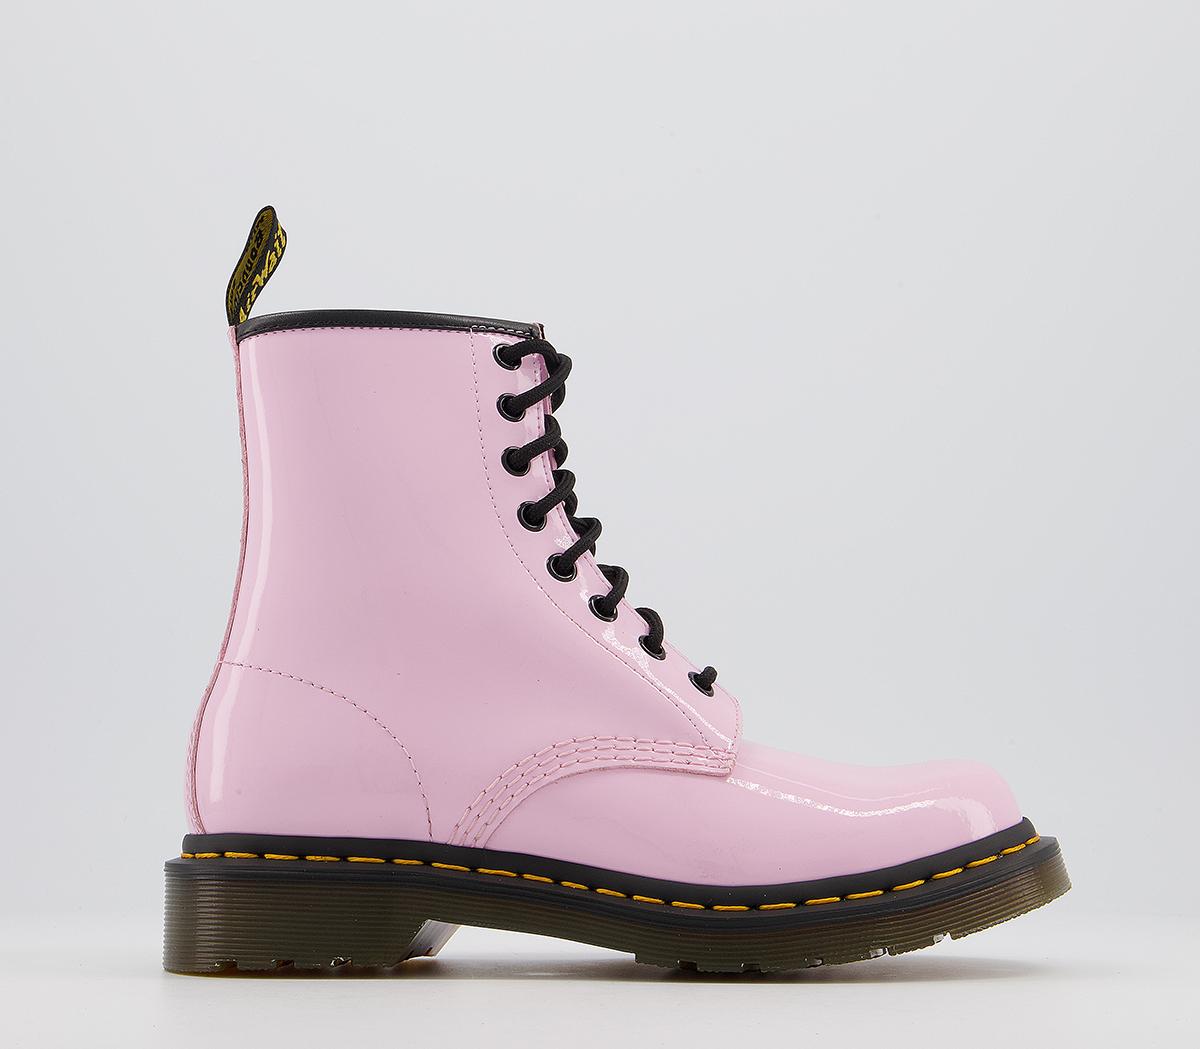 Dr. Martens 8 Eyelet Lace Up Boots Pale Pink Patent - Women's Ankle Boots